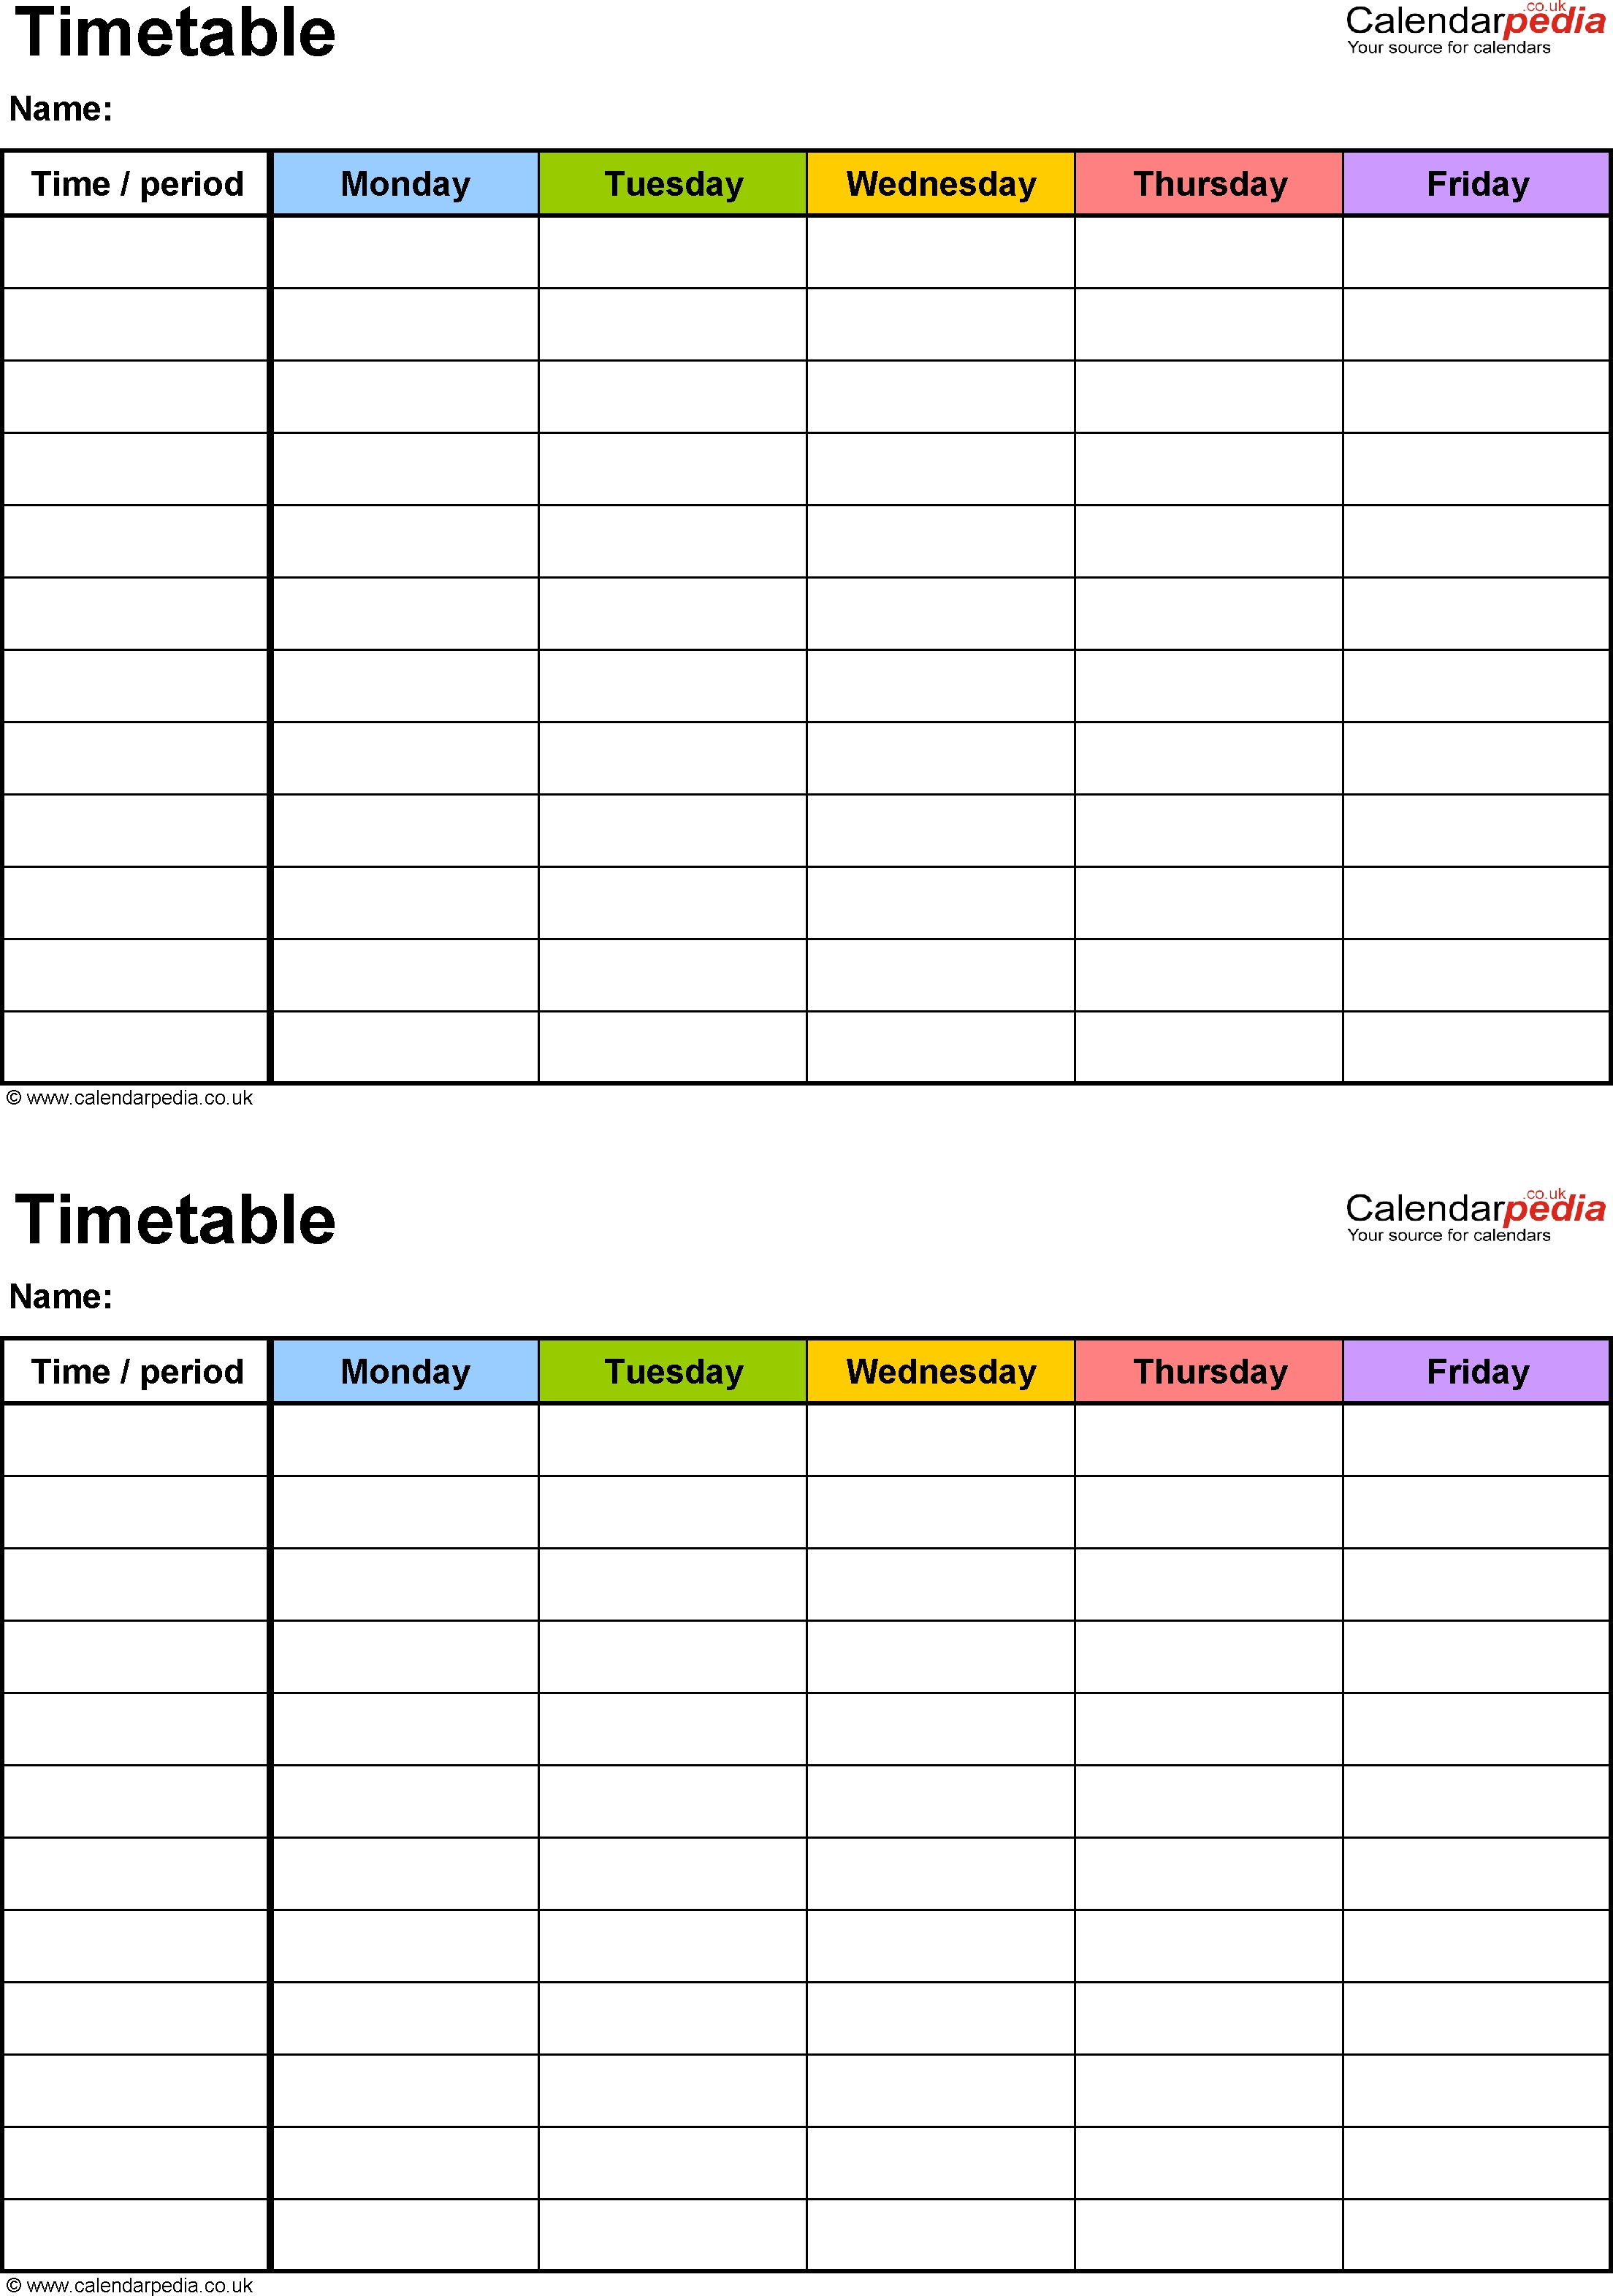 Excel Timetable Template 6: 2 A5 Timetables On One Page throughout Monday To Friday Timetable Excel